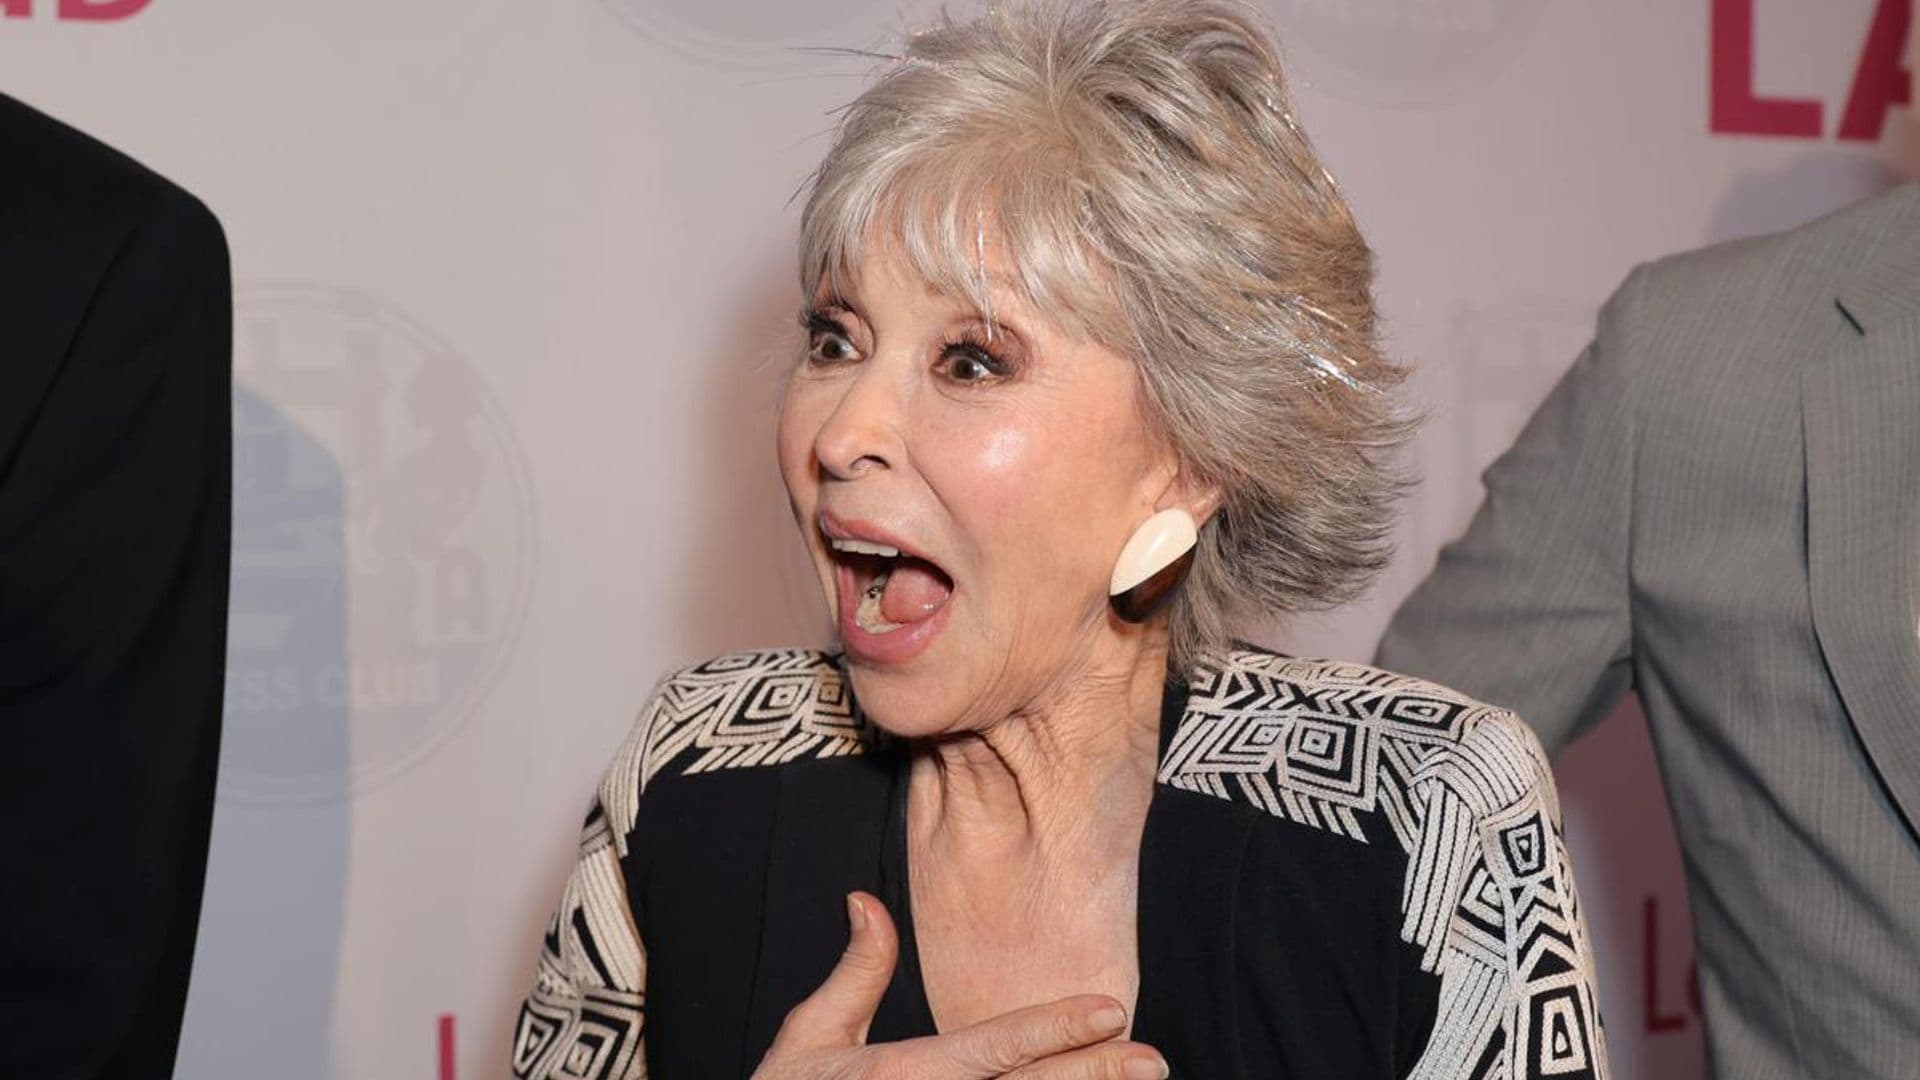 Rita Moreno will be inducted into the Television Academy Hall of Fame